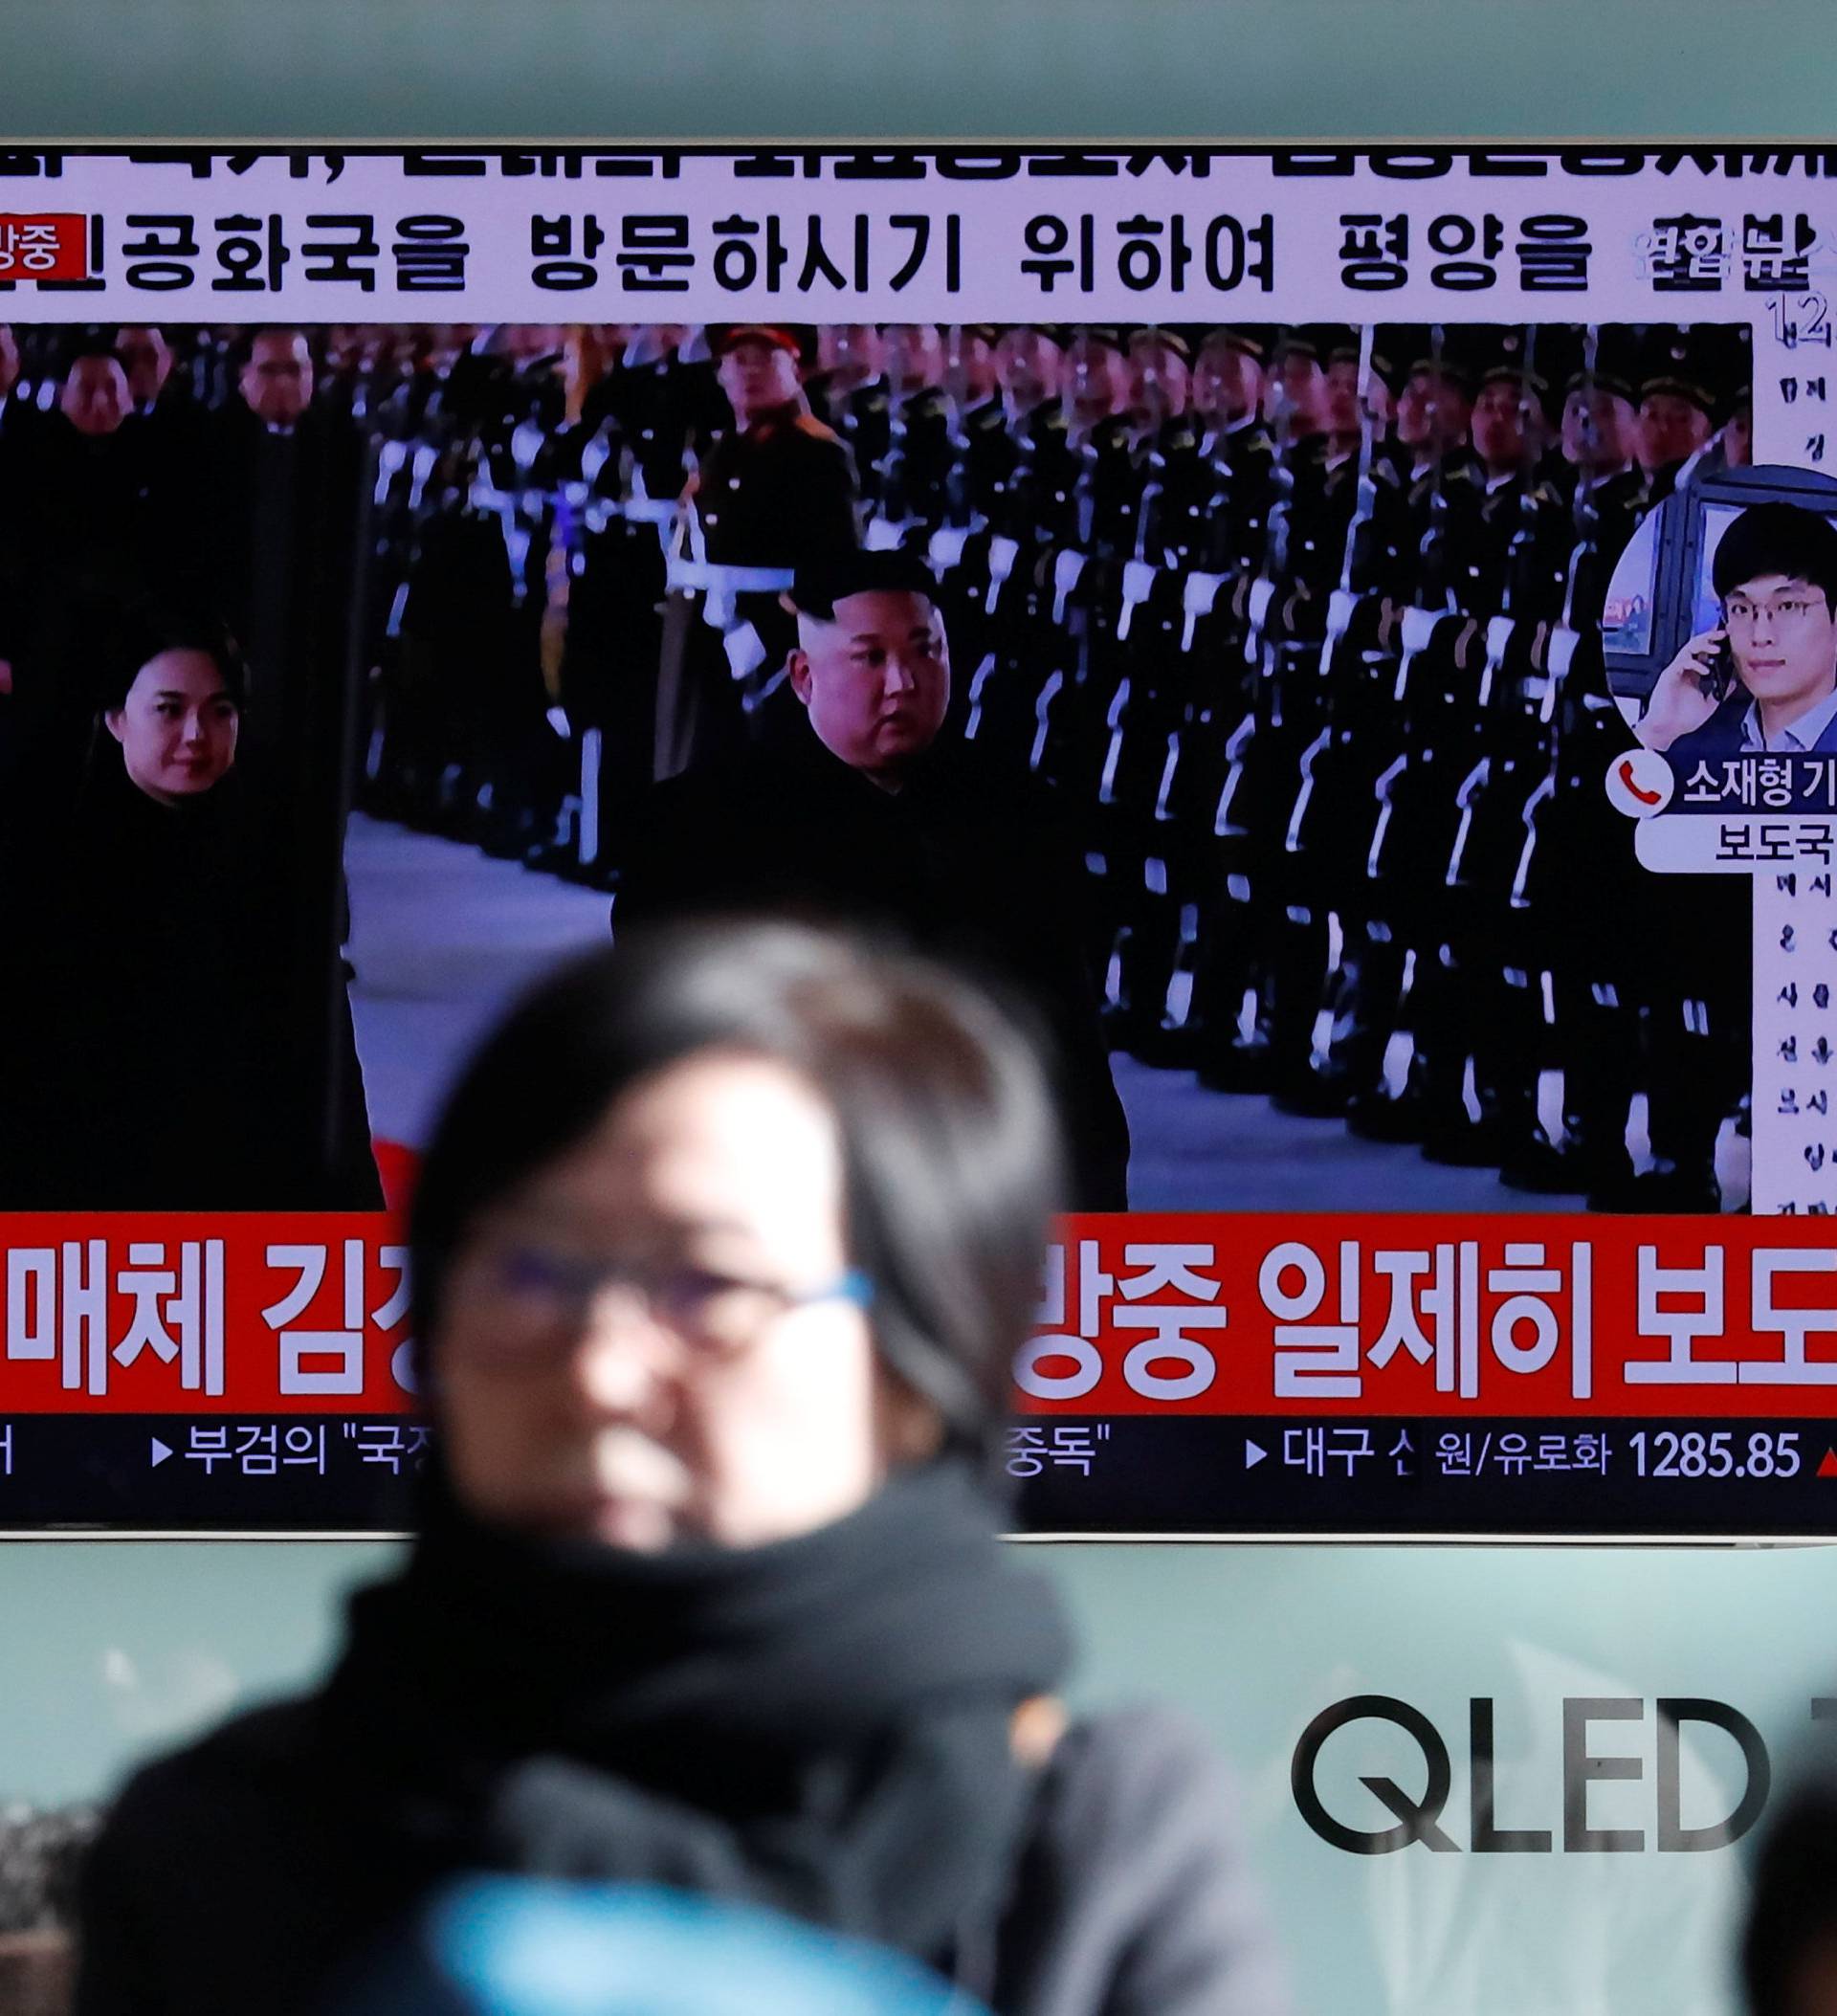 People watch a TV broadcasting a news report on North Korean leader Kim Jong Un's visit to China, in Seoul